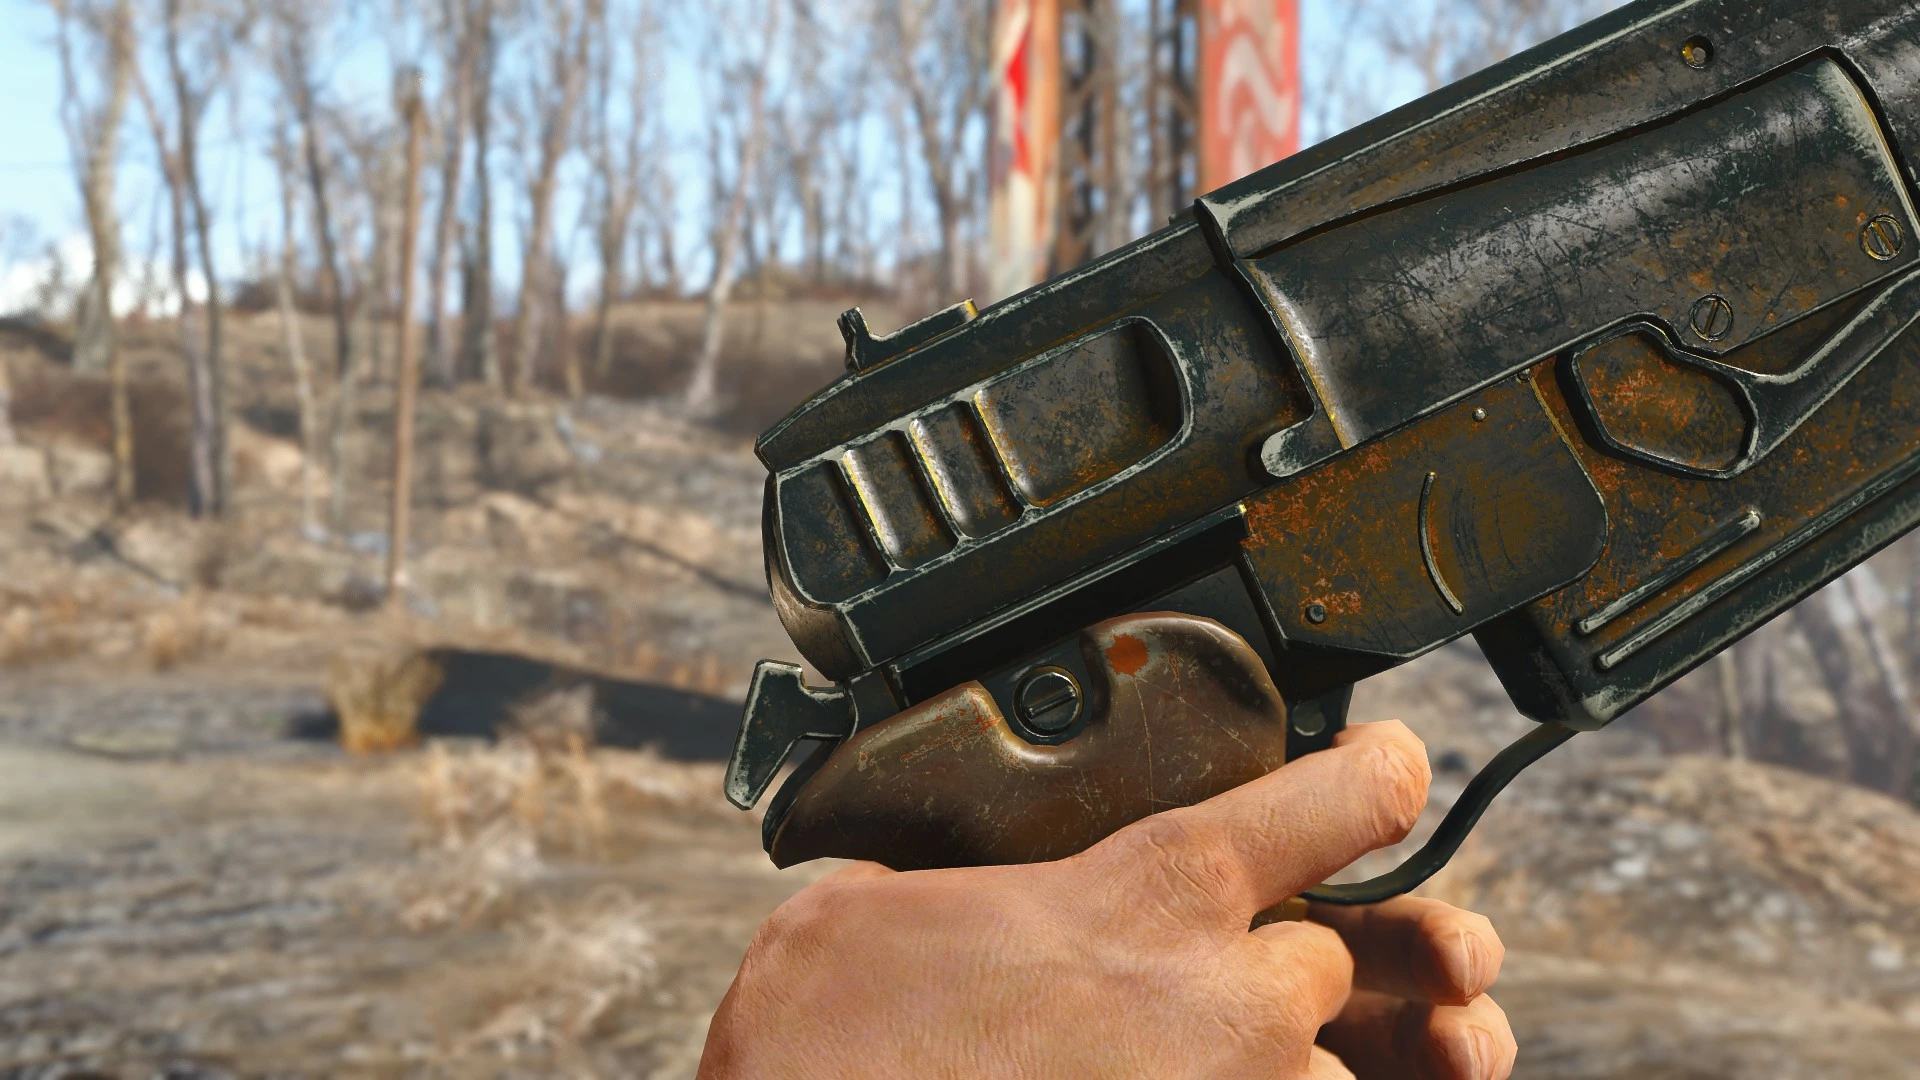 Holstered weapons fallout 4 фото 39